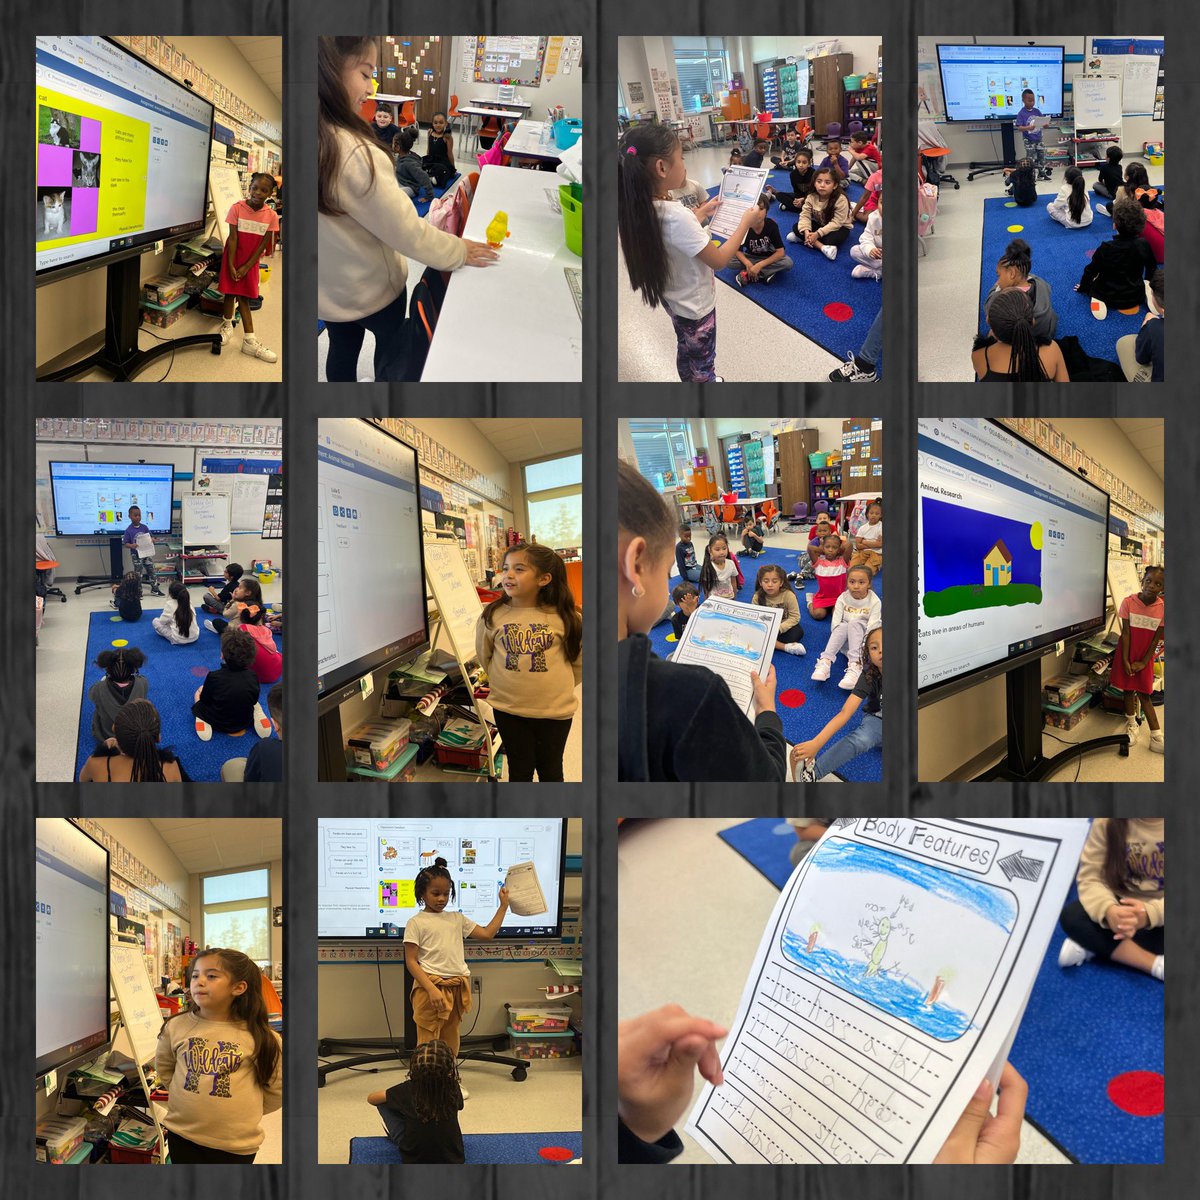 Last week we presented our research using different types of presentations. Students chose between a book or @Wixie_T4L to show of their expertise of their animals. @HumbleISD_DDI @cassreescano @ArmyAg86 @HumbleISD_LLE @HumbleISD @Humble_ElemELA